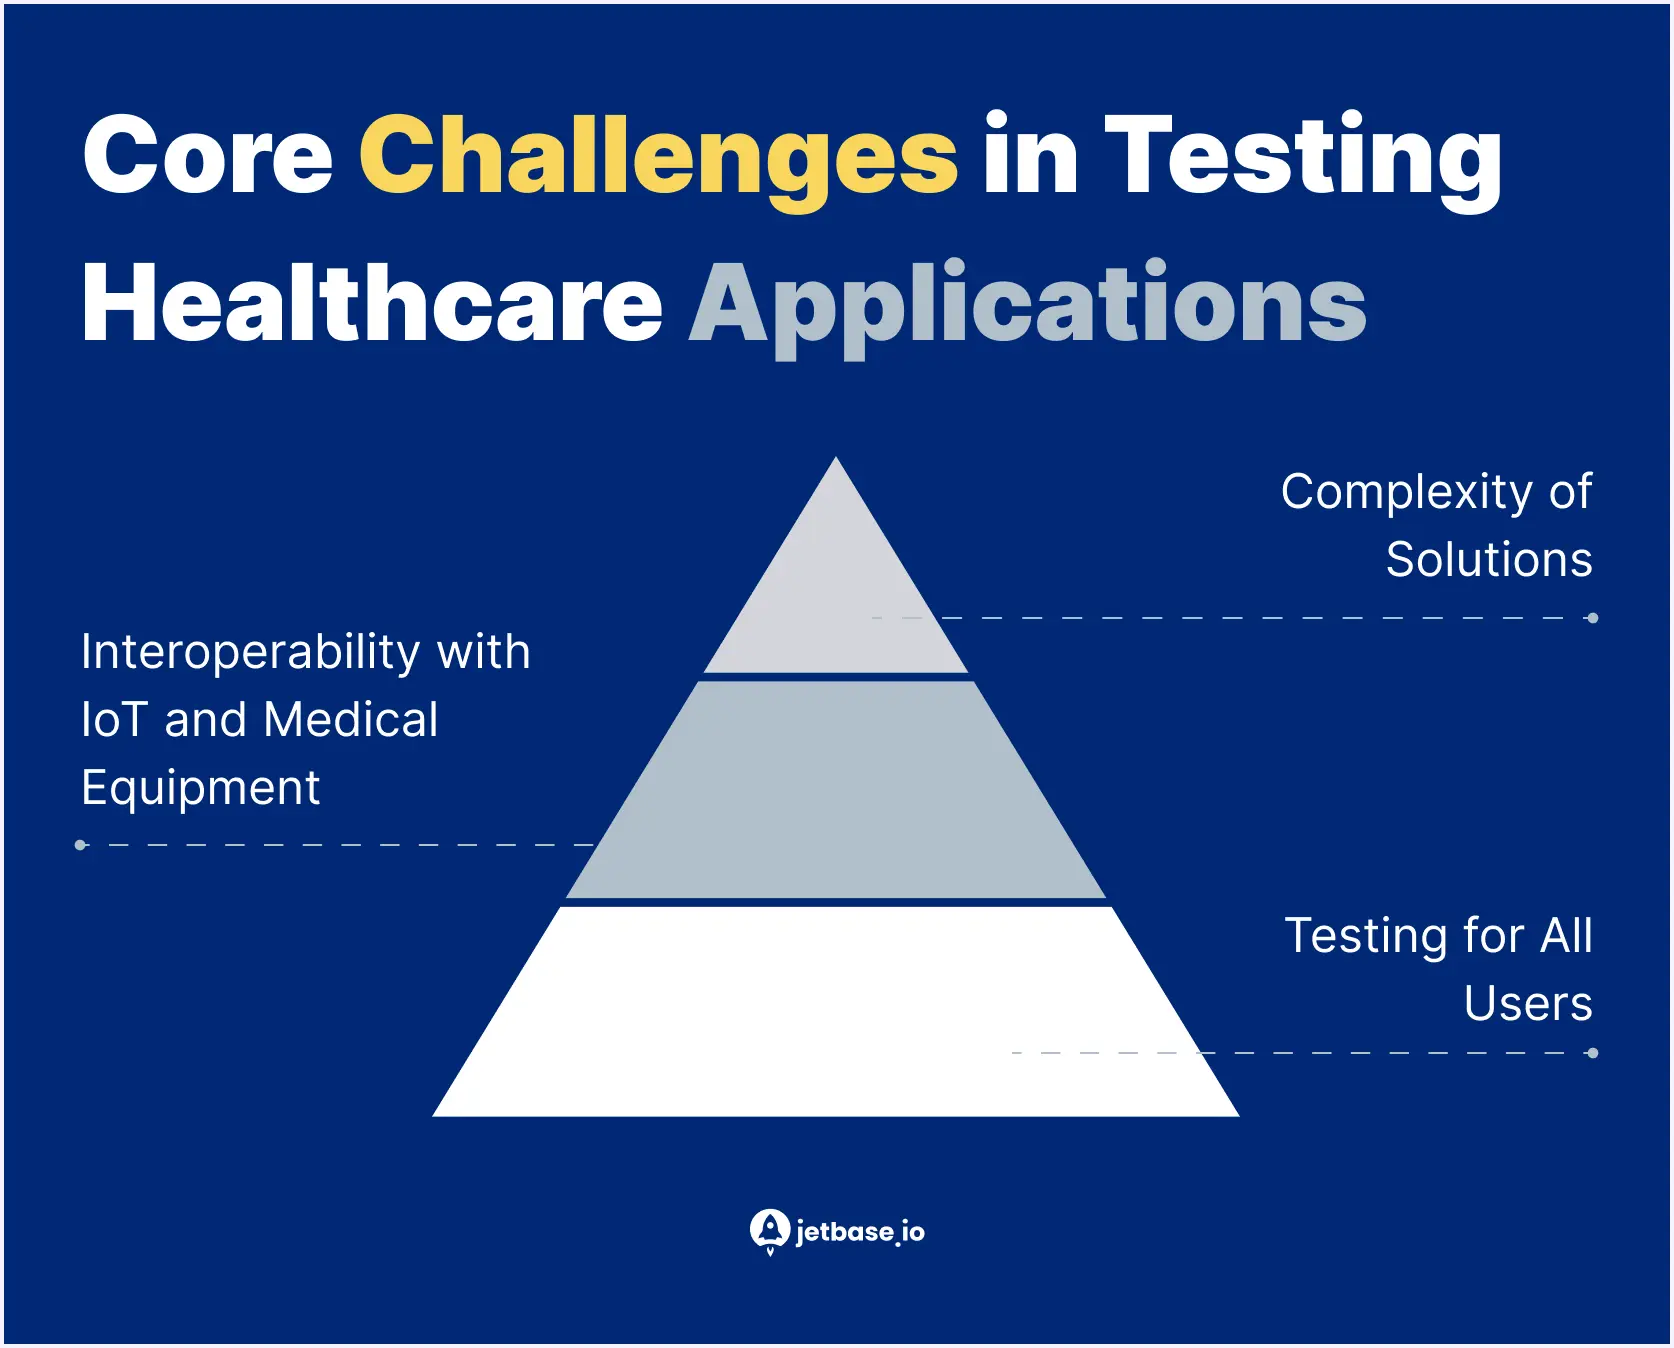 Key Challenges in Testing Healthcare Applications.webp